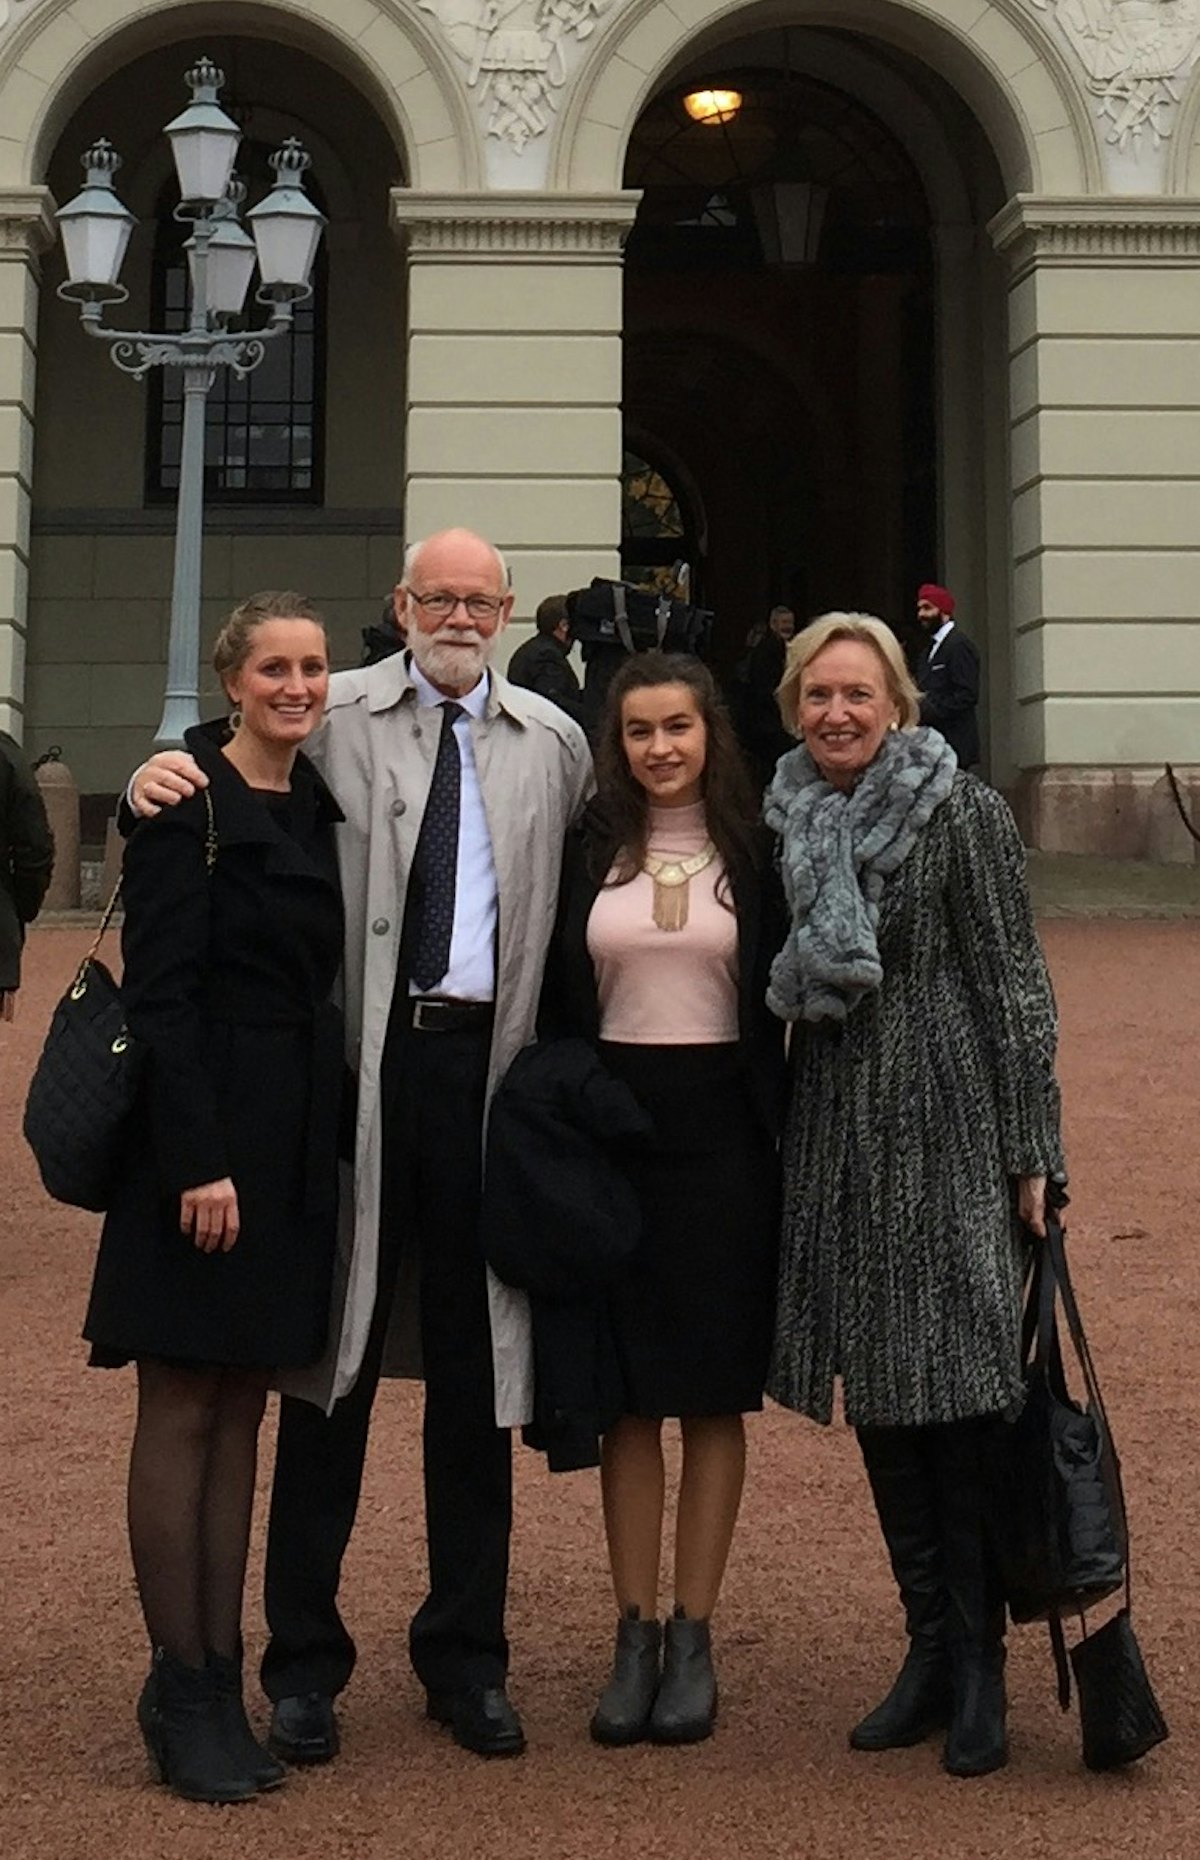 Representatives from the Baha'i community attended the event. From left to right: Martine Lerstad, Arne Kittang, Neda Schulz, and Britt Strandlie Thoresen. (Photo by Baha'I community of Norway)